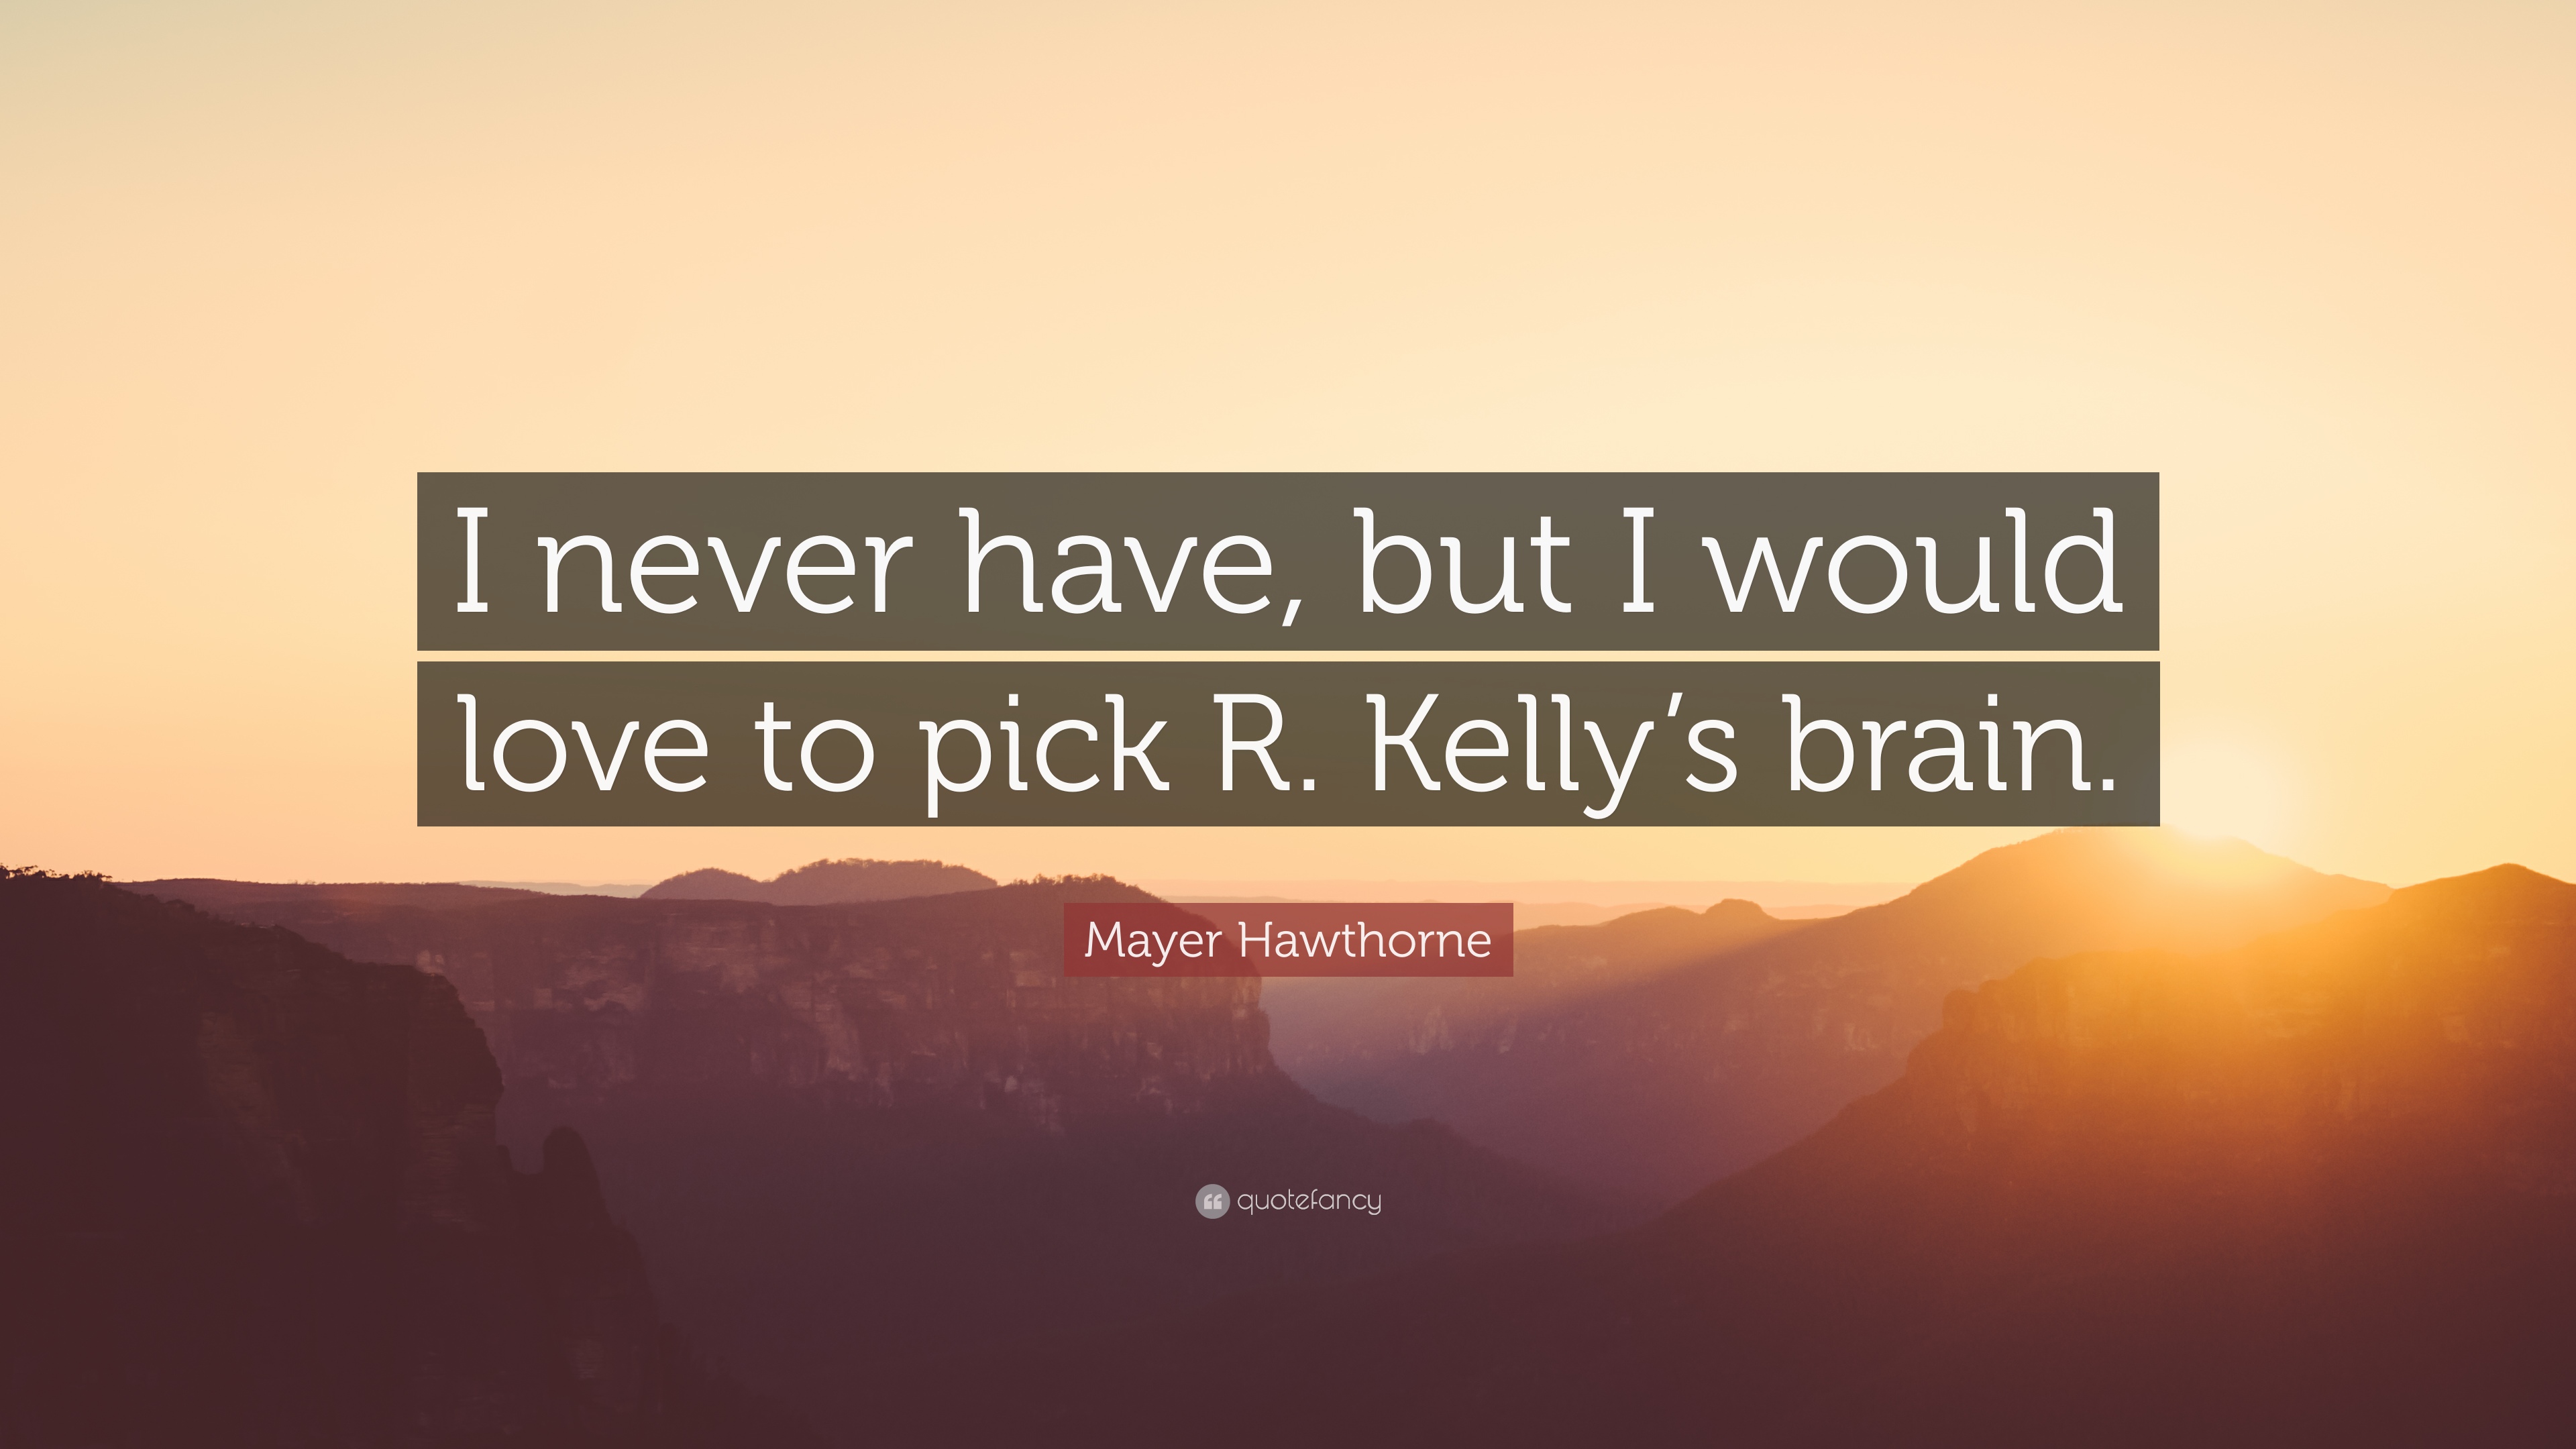 Mayer Hawthorne Quote: “I never have, but I would love to pick R ...